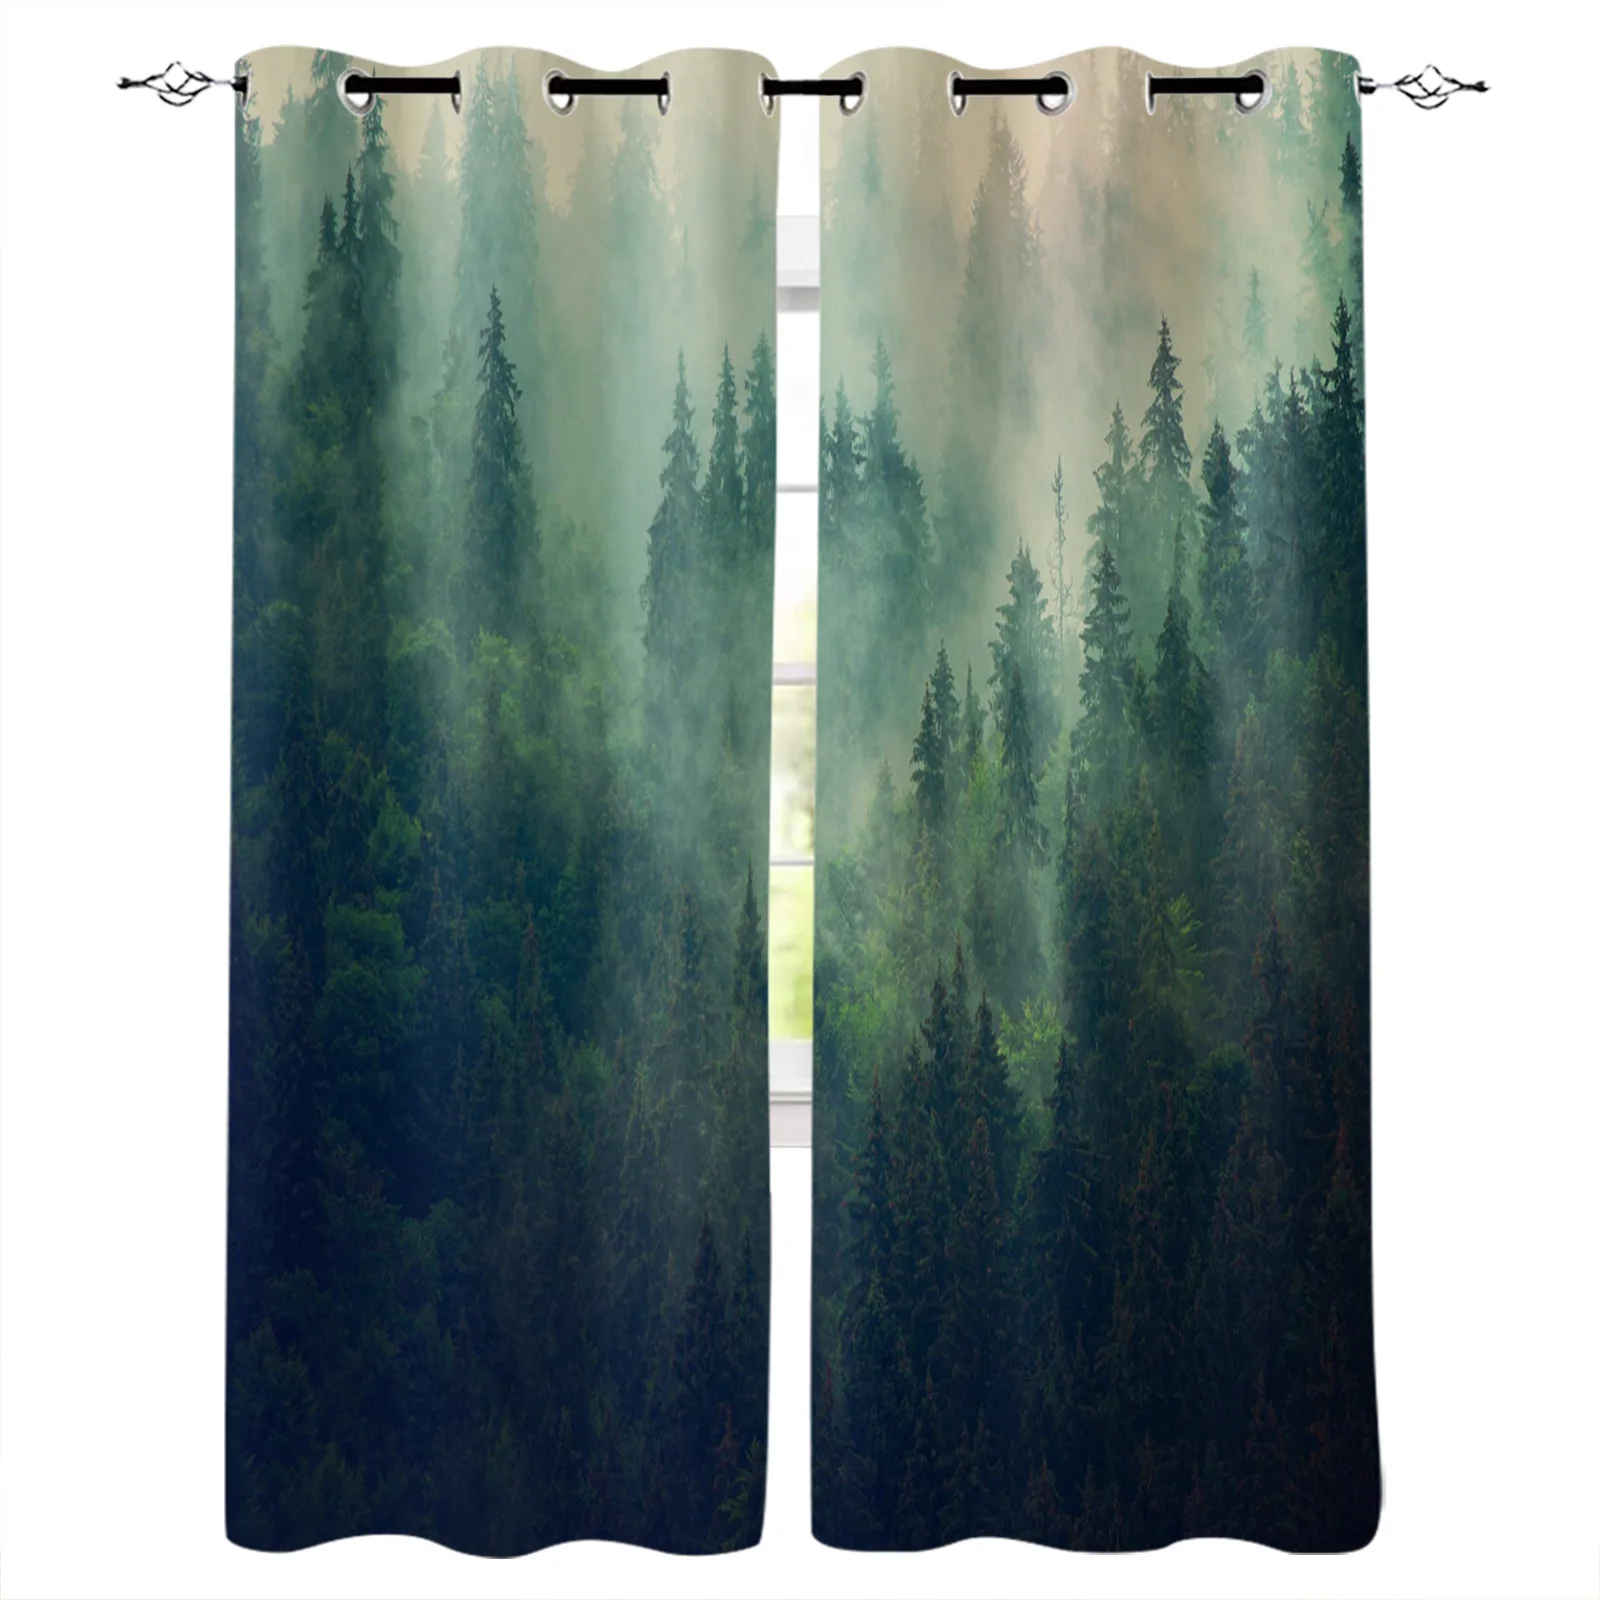 

Misty Mountains Forest Blackout Curtains For Living Room Bedroom Printed Window Treatment Drapes Home Decor